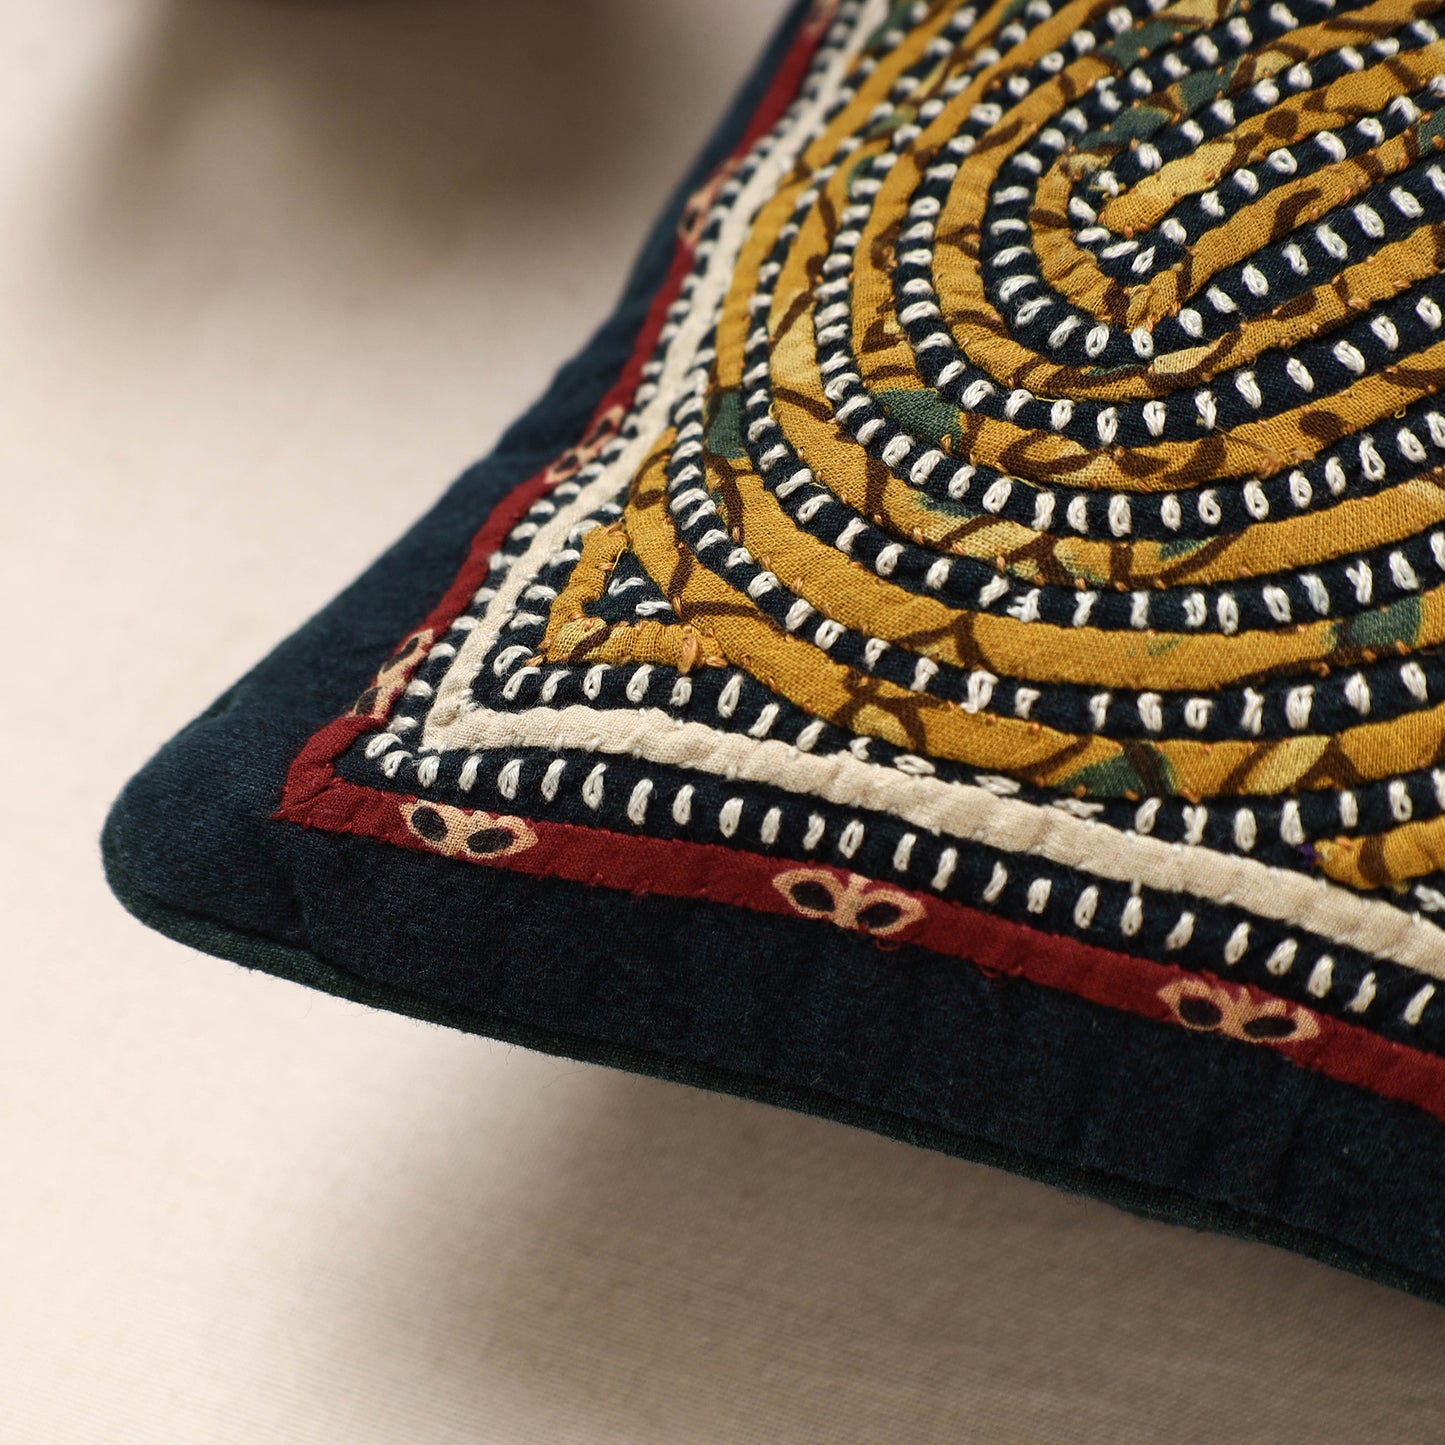 Hand Embroidery Cushion Cover